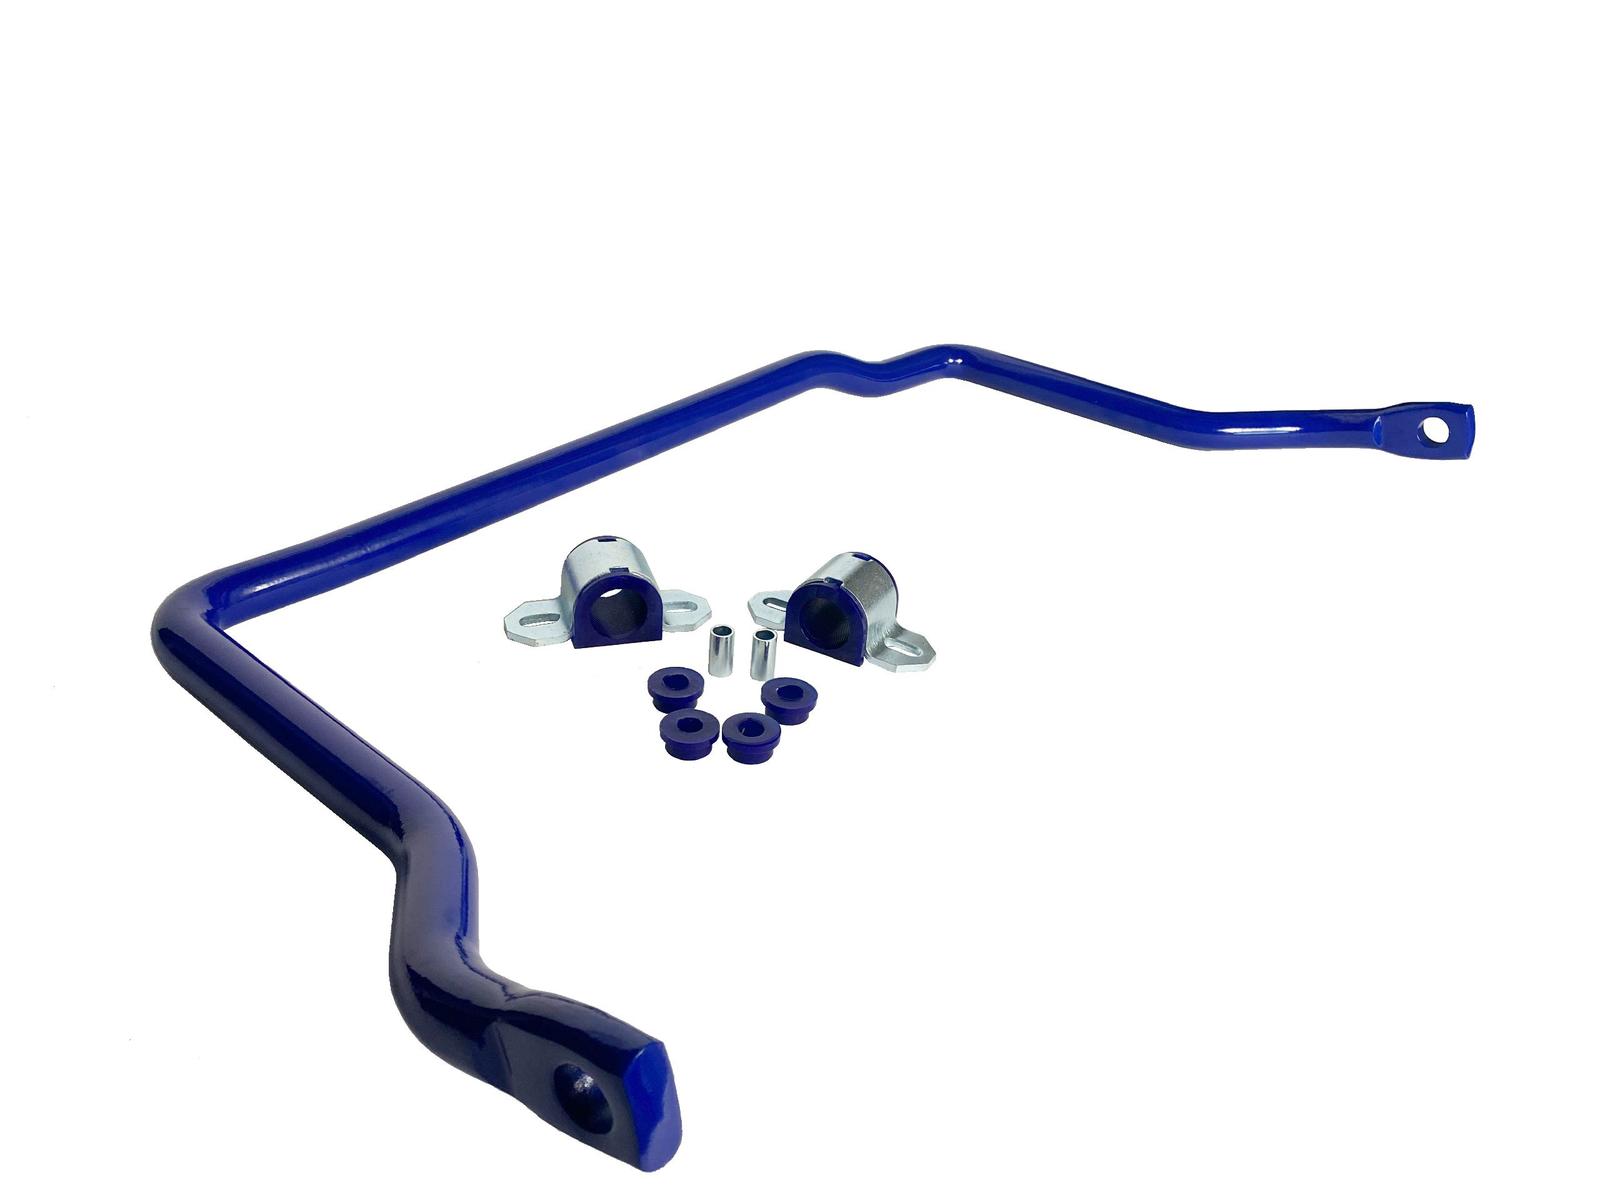 33mm Heavy Duty Front 4x4 Sway Bar Kit to suit Toyota Land Cruiser 80 Series 1993-1997 & 105 Series